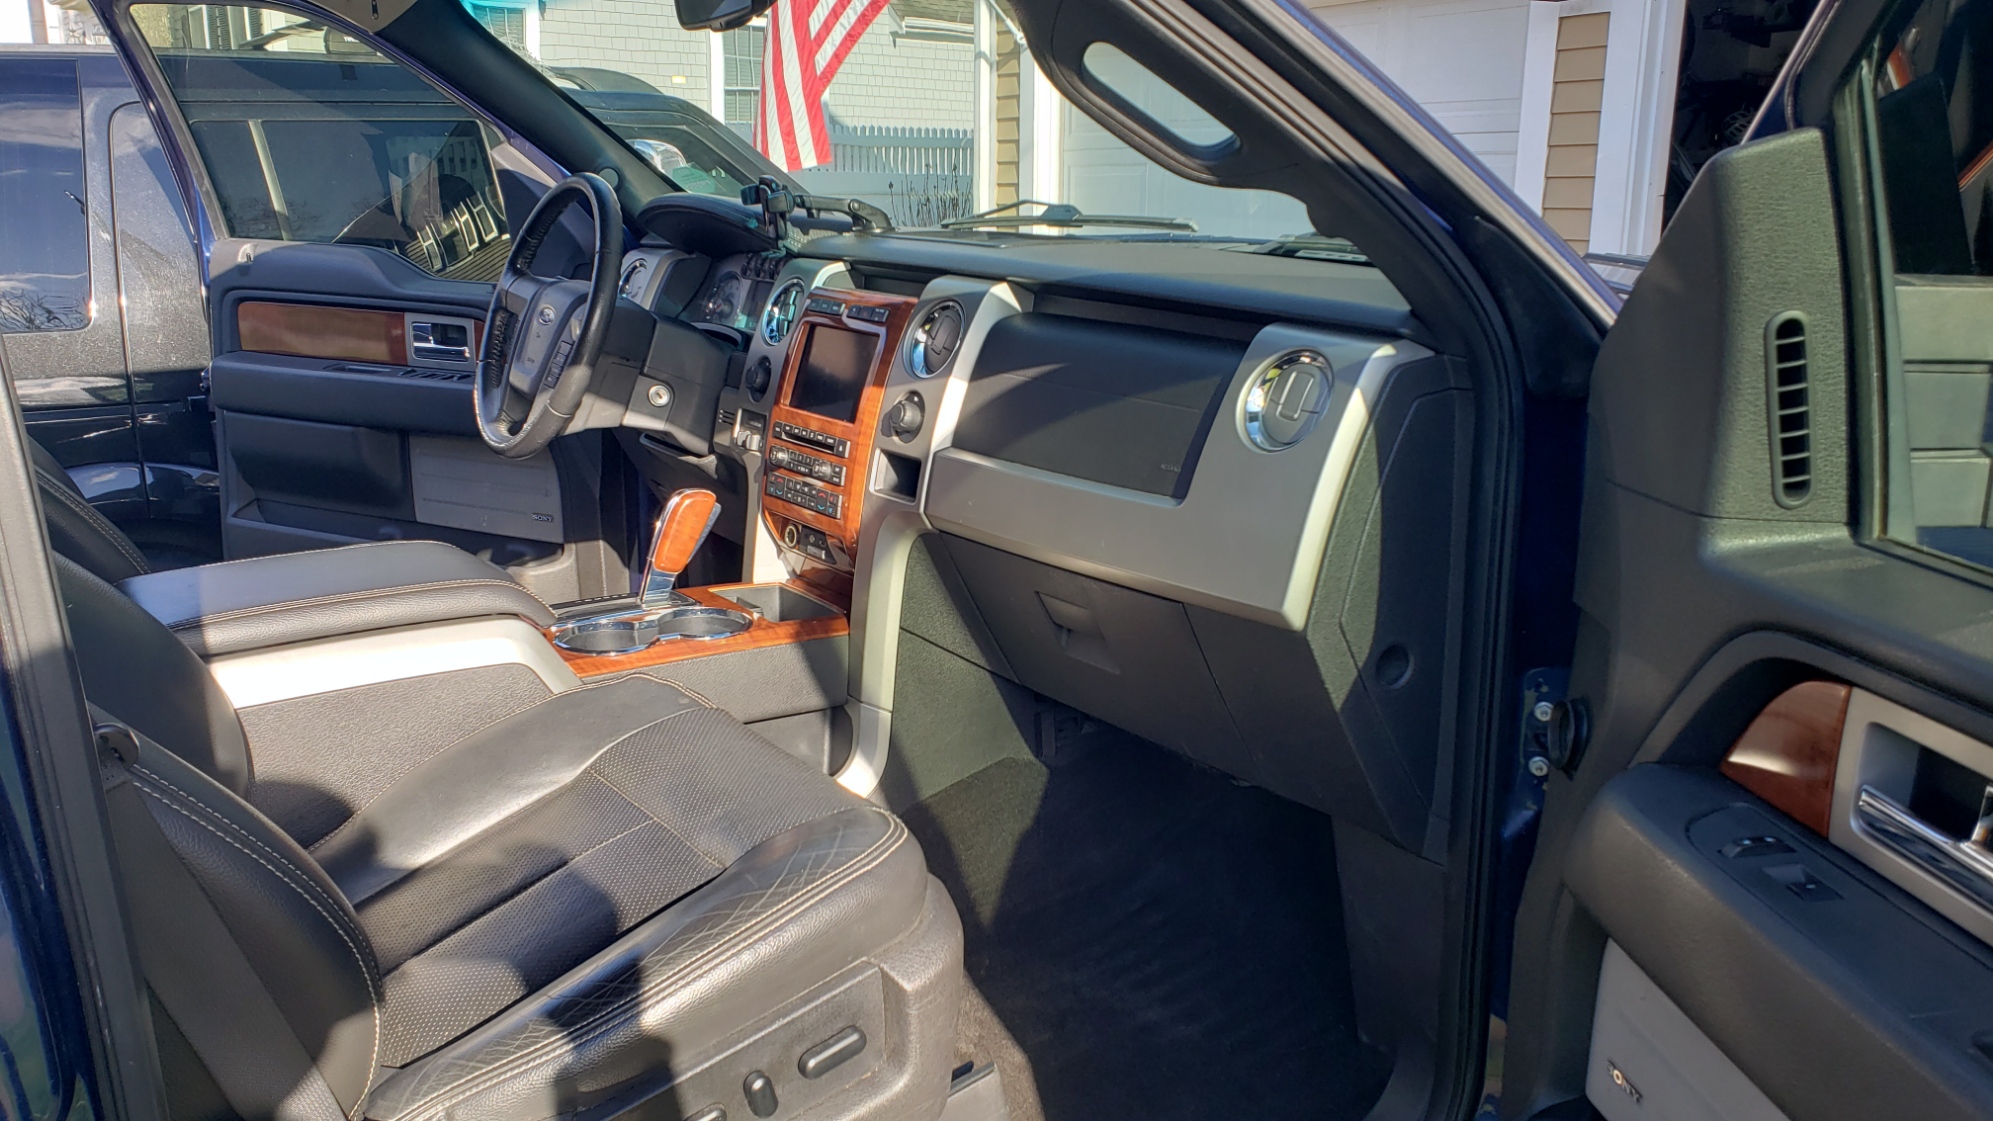 2021 F150 Lariat lump under backseat floor? - Ford F150 Forum - Community  of Ford Truck Fans